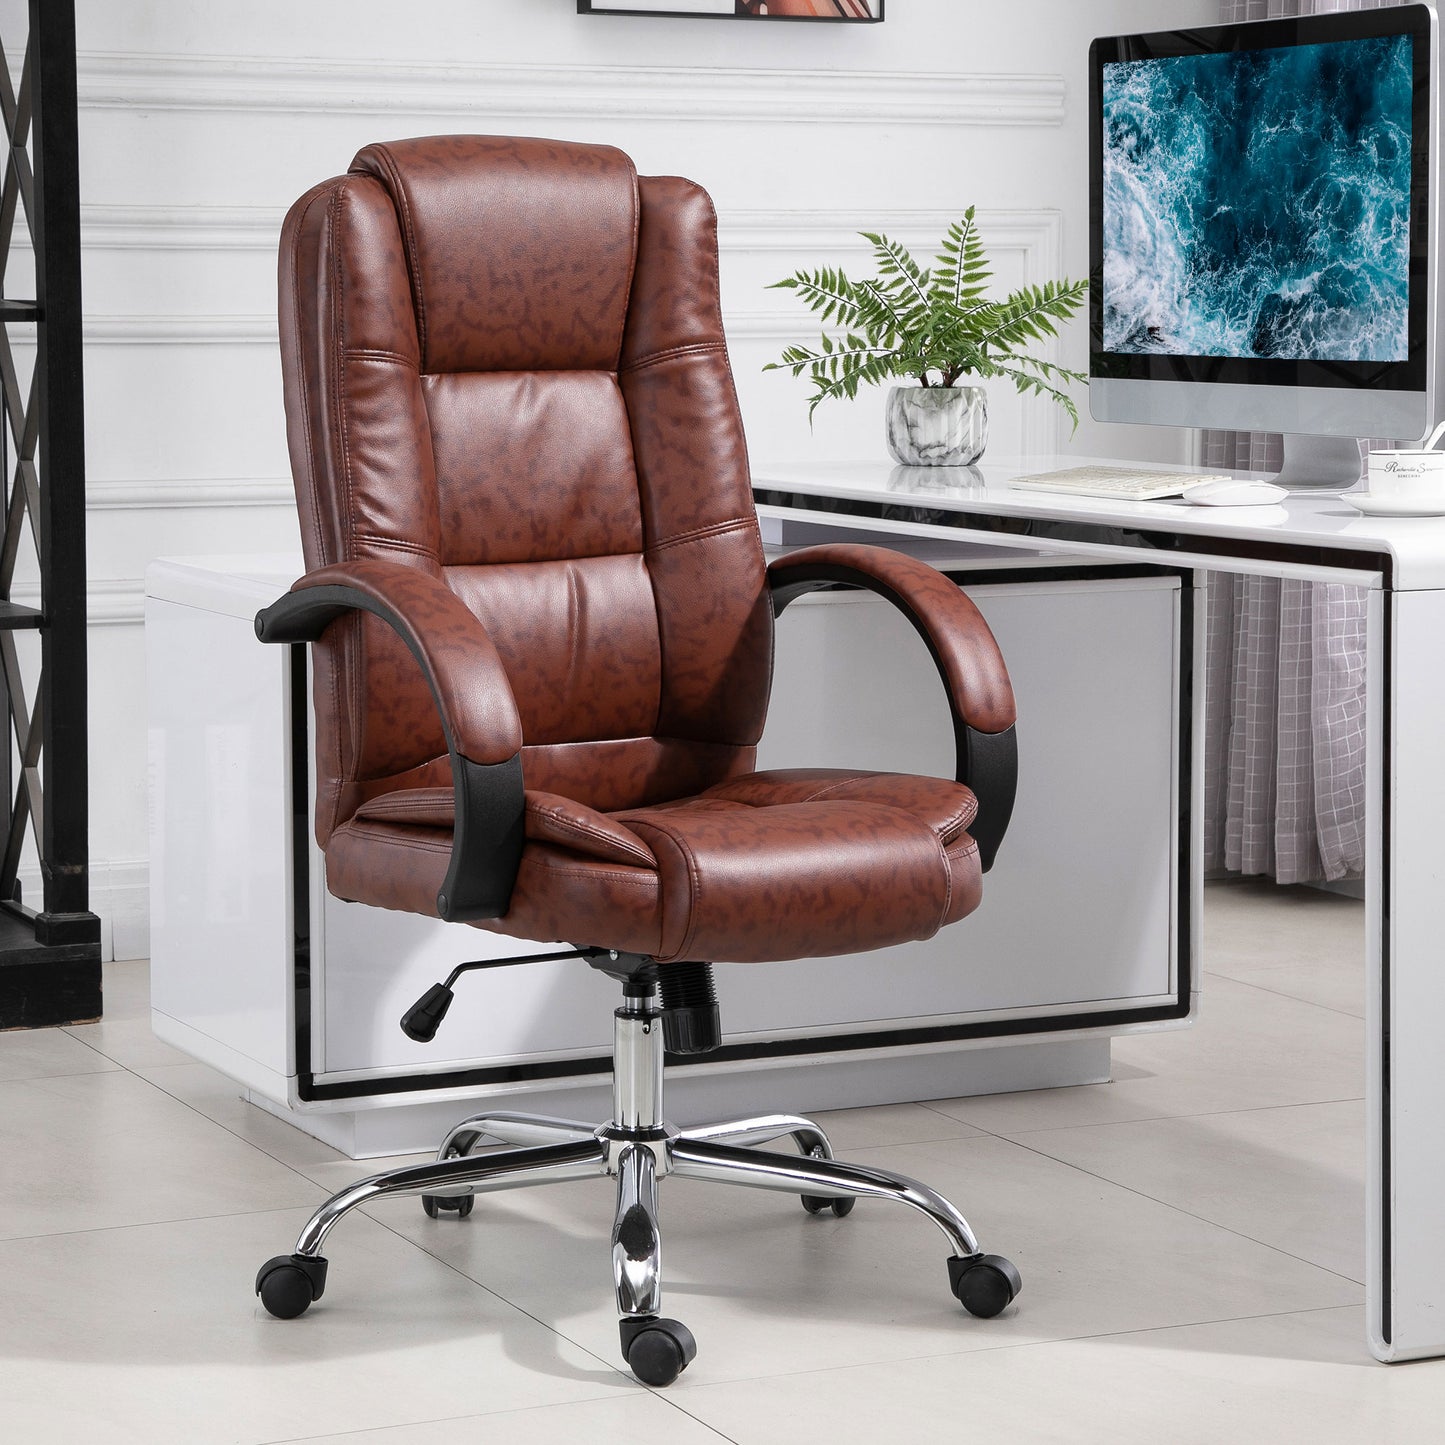 Vinsetto High Back Executive Office Chair, 360° Swivel, PU Leather-Brown